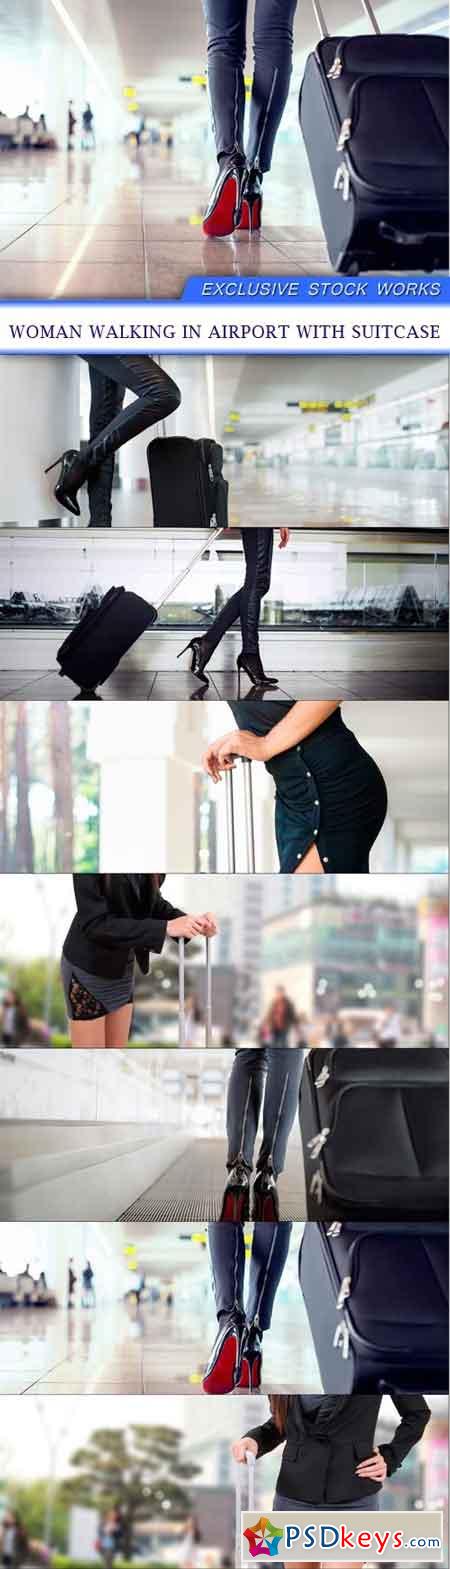 Woman walking in airport with suitcase 7x JPEG